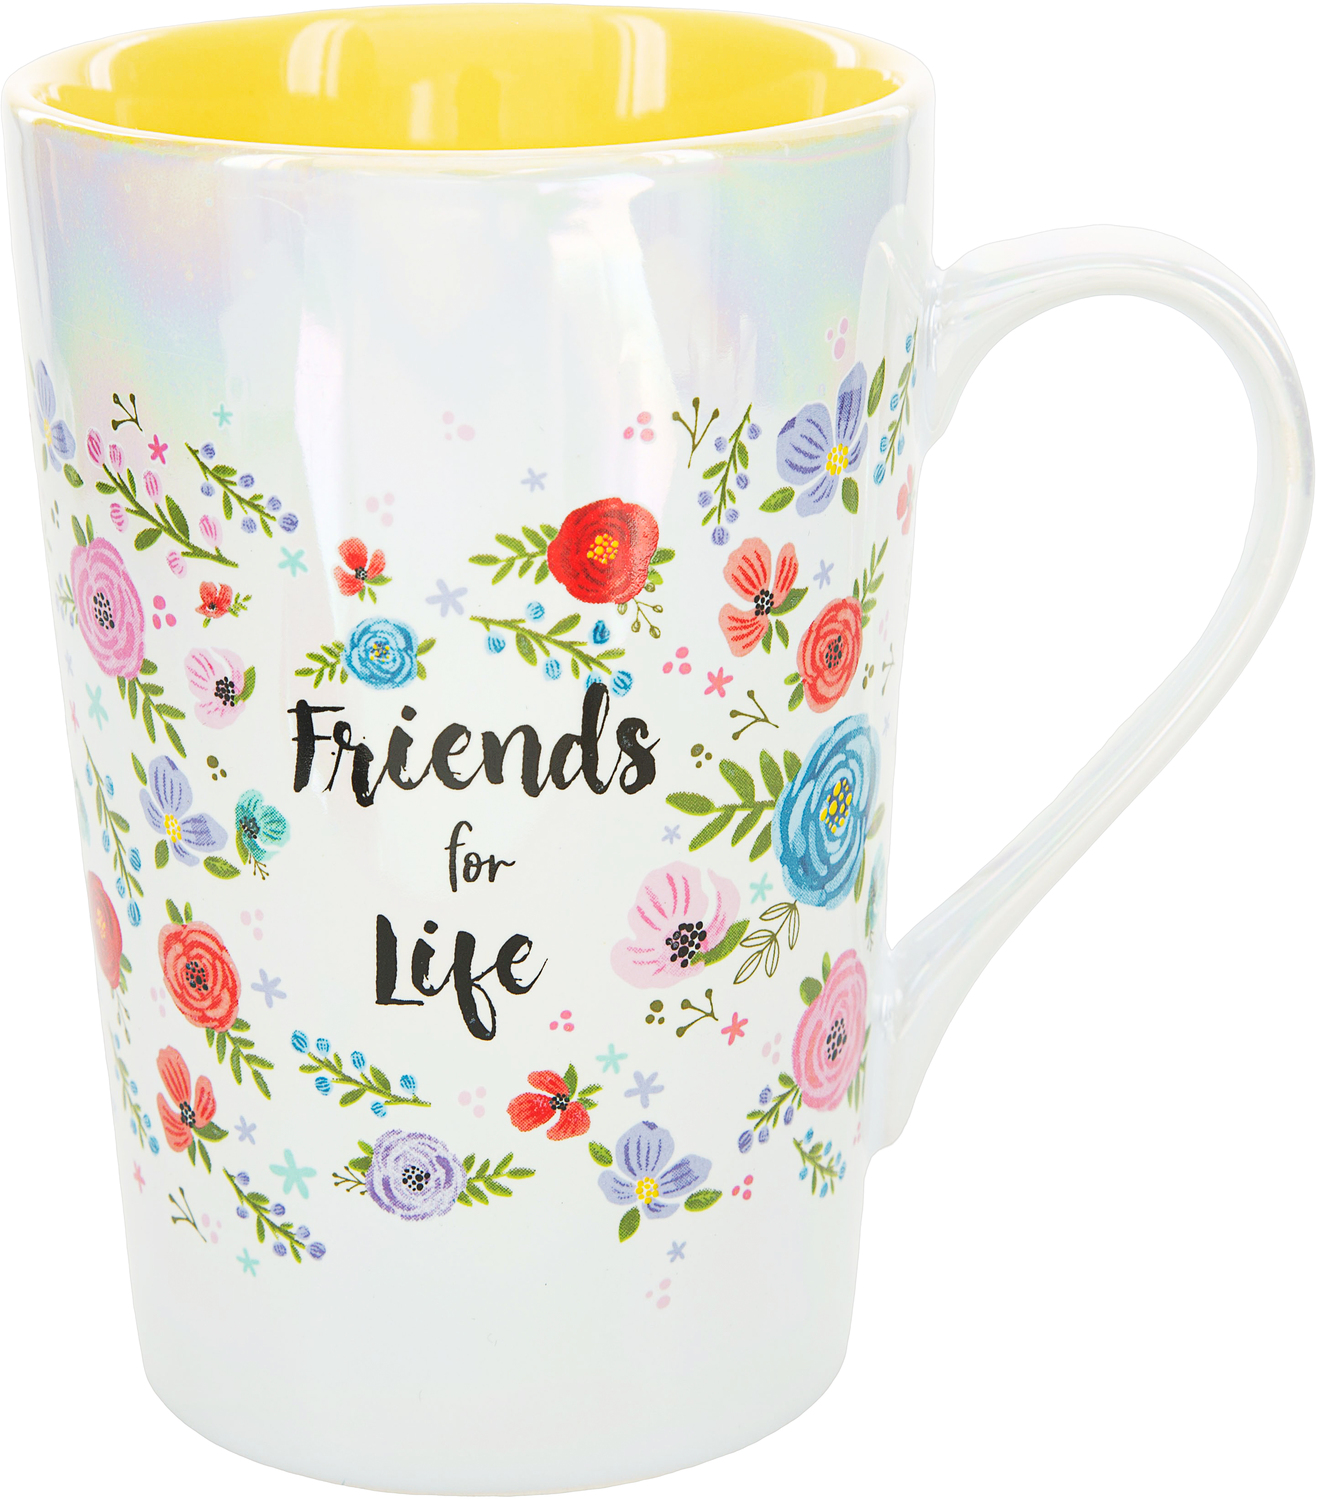 Friends by Bunches of Love - Friends - 15 oz. Latte Cup